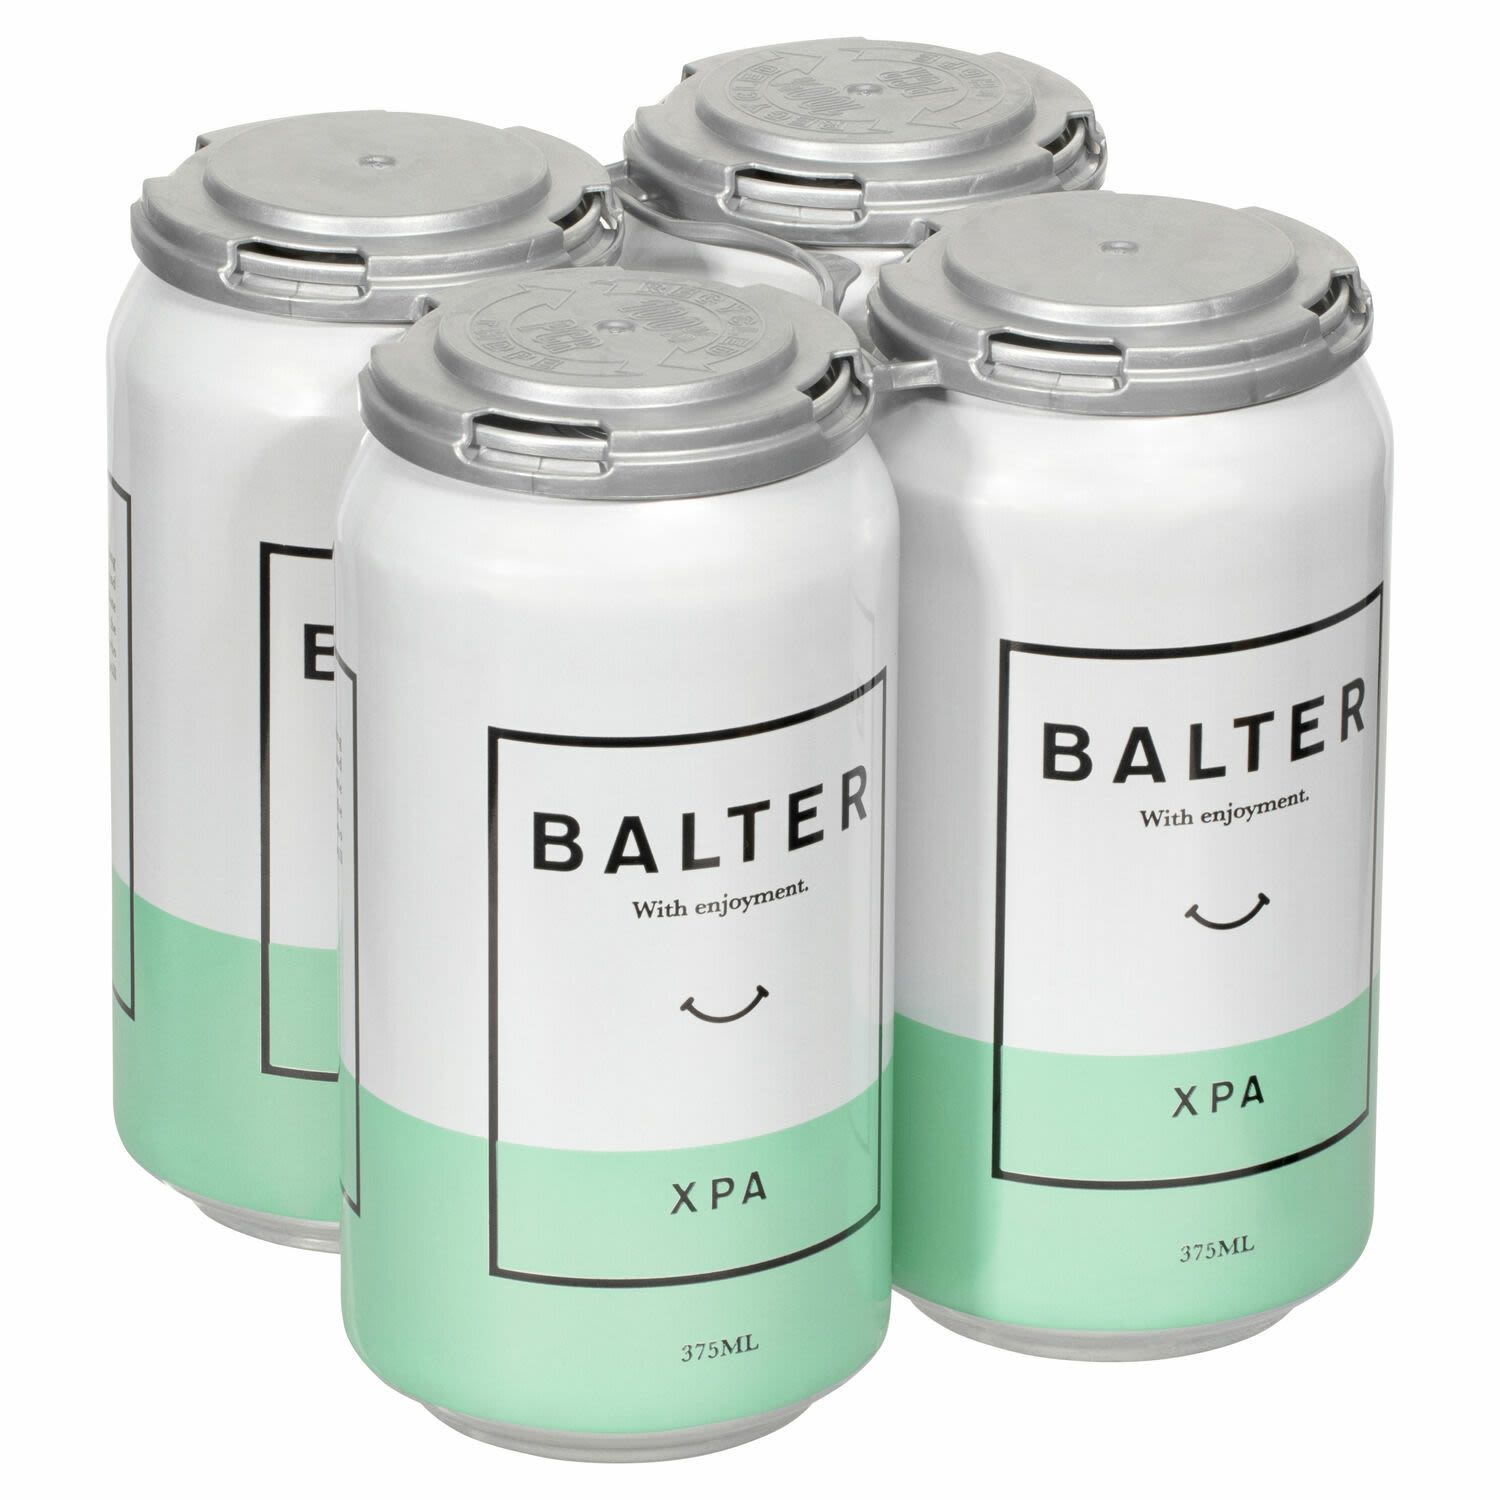 The Balter XPA will punch your taste buds with tropical and floral aromatics along with a fruity palette. This brew is for those who enjoy an easy to drink, fully-hopped beer.<br /> <br />Alcohol Volume: 5.00%<br /><br />Pack Format: 4 Pack<br /><br />Standard Drinks: 1.5</br /><br />Pack Type: Can<br /><br />Country of Origin: Australia<br />